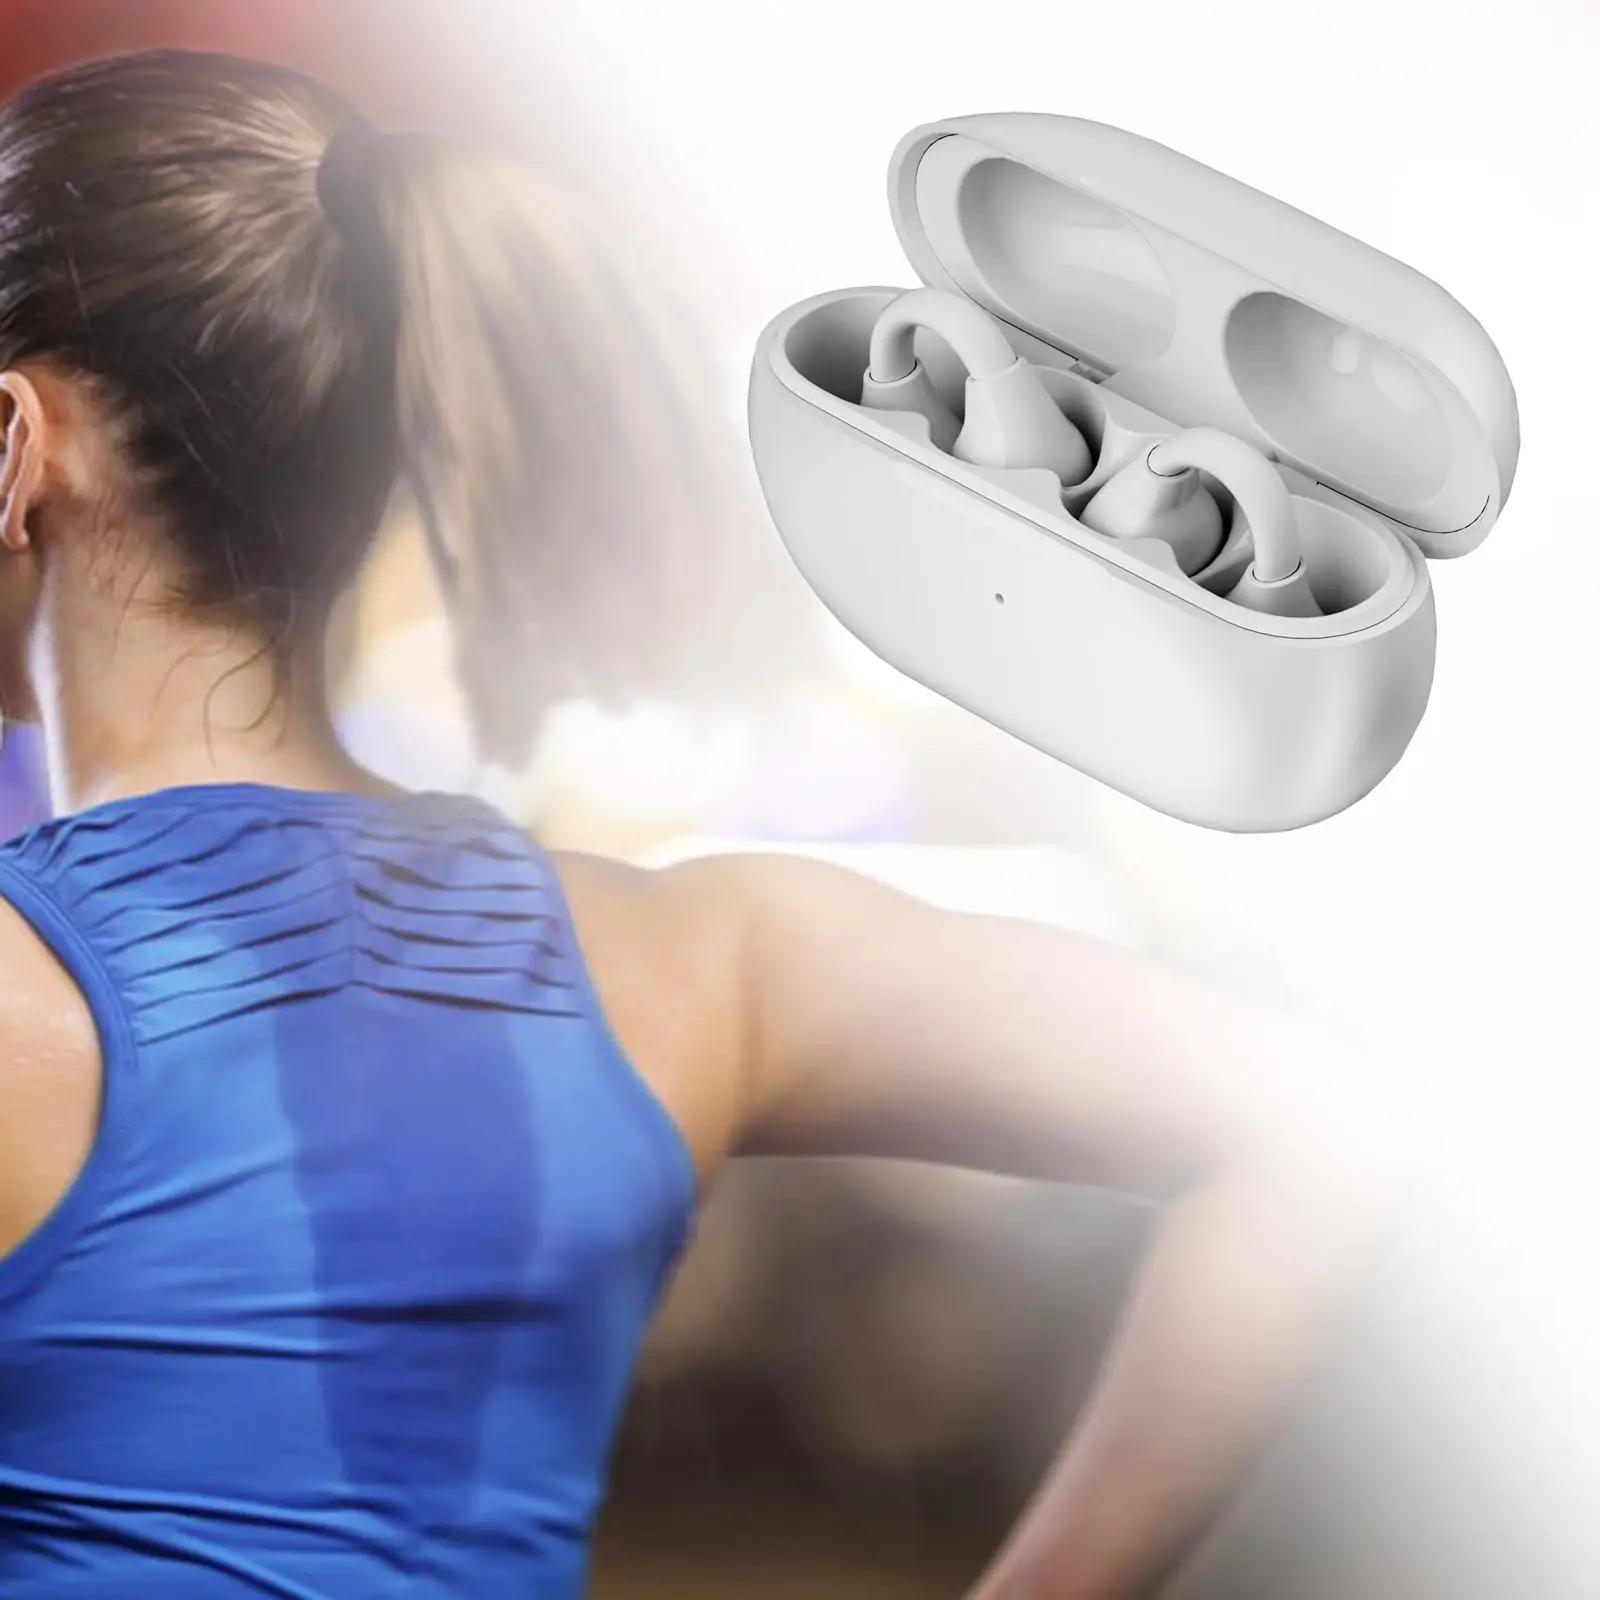 Ear Clip Wireless Headset Low Latency Noise Reduction Calling HiFi Sound Earphones Sport Earbuds for Running Fitness Workout